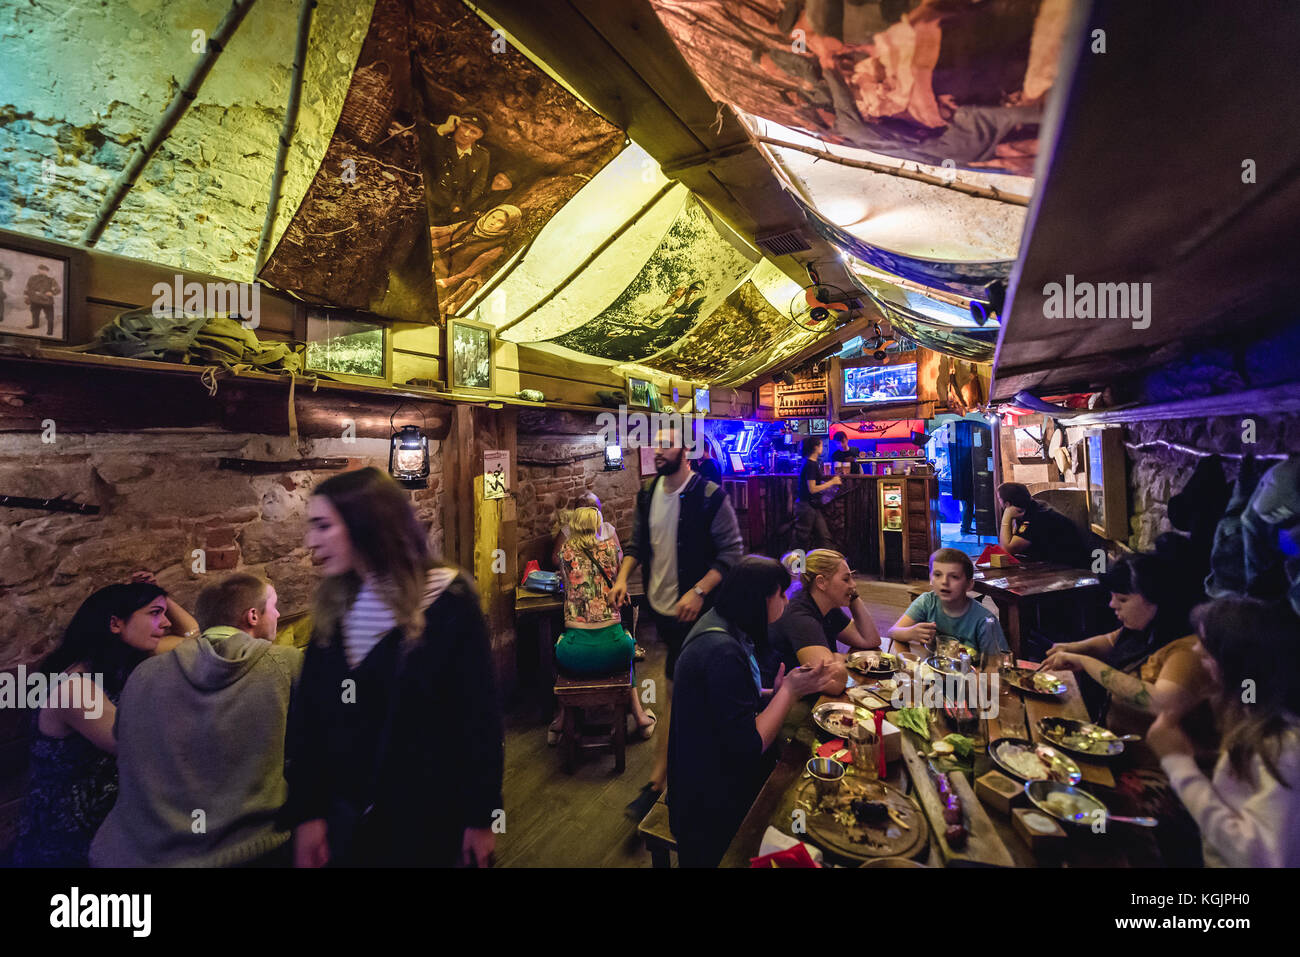 Kryyivka (Hiding place - in English known as Underground Bunker) Restaurant and Bar on the Old Town of Lviv city, largest city in western Ukraine Stock Photo